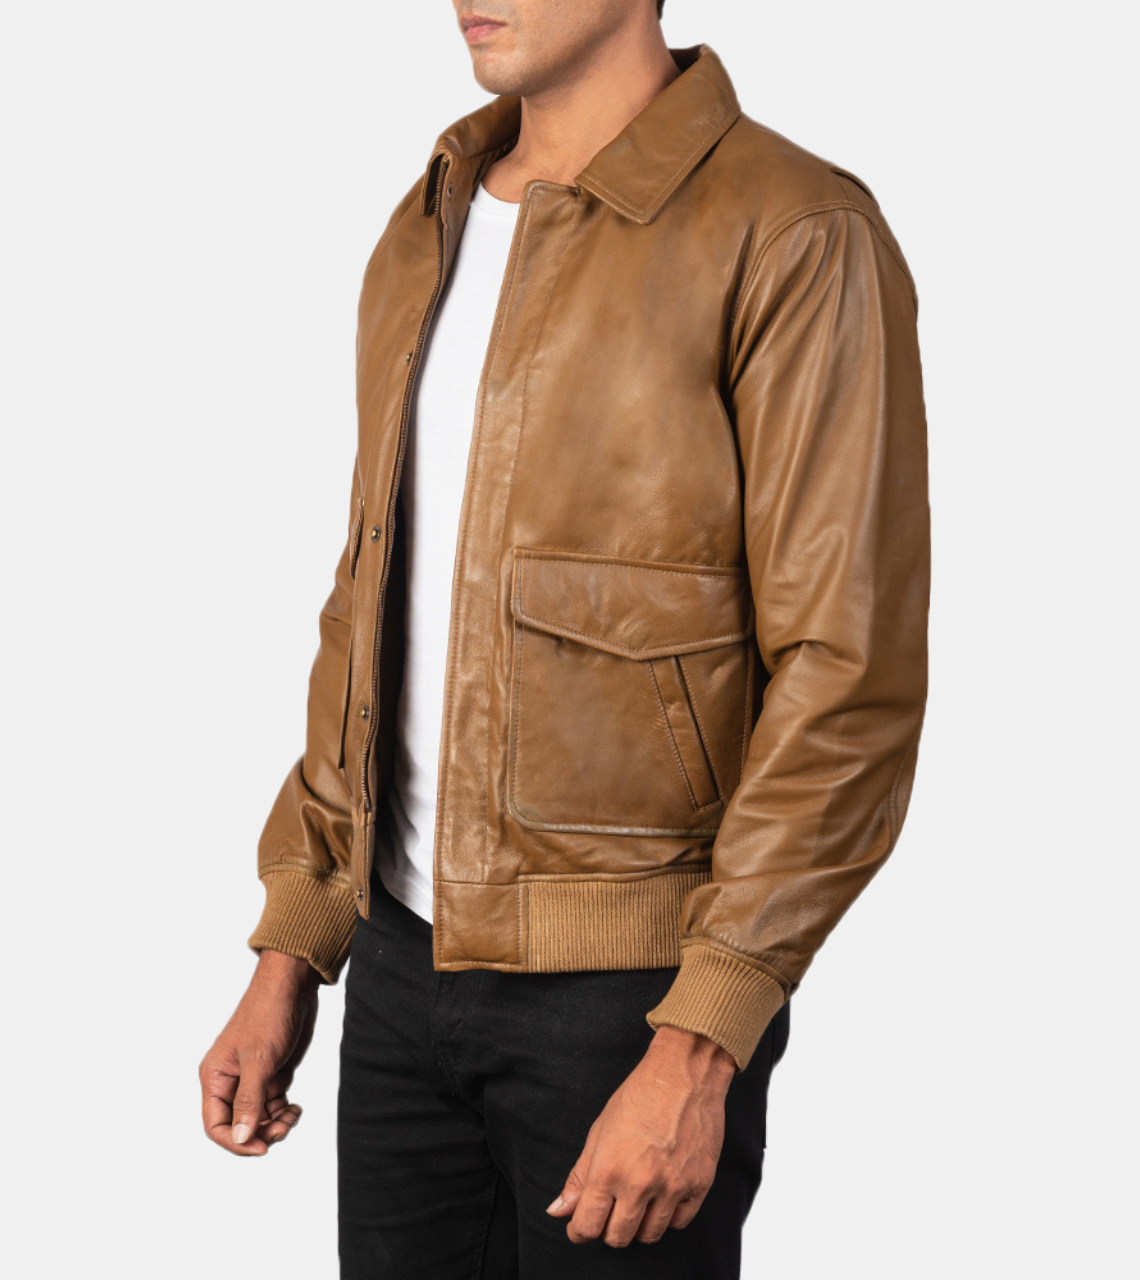  Brown Leather Jacket